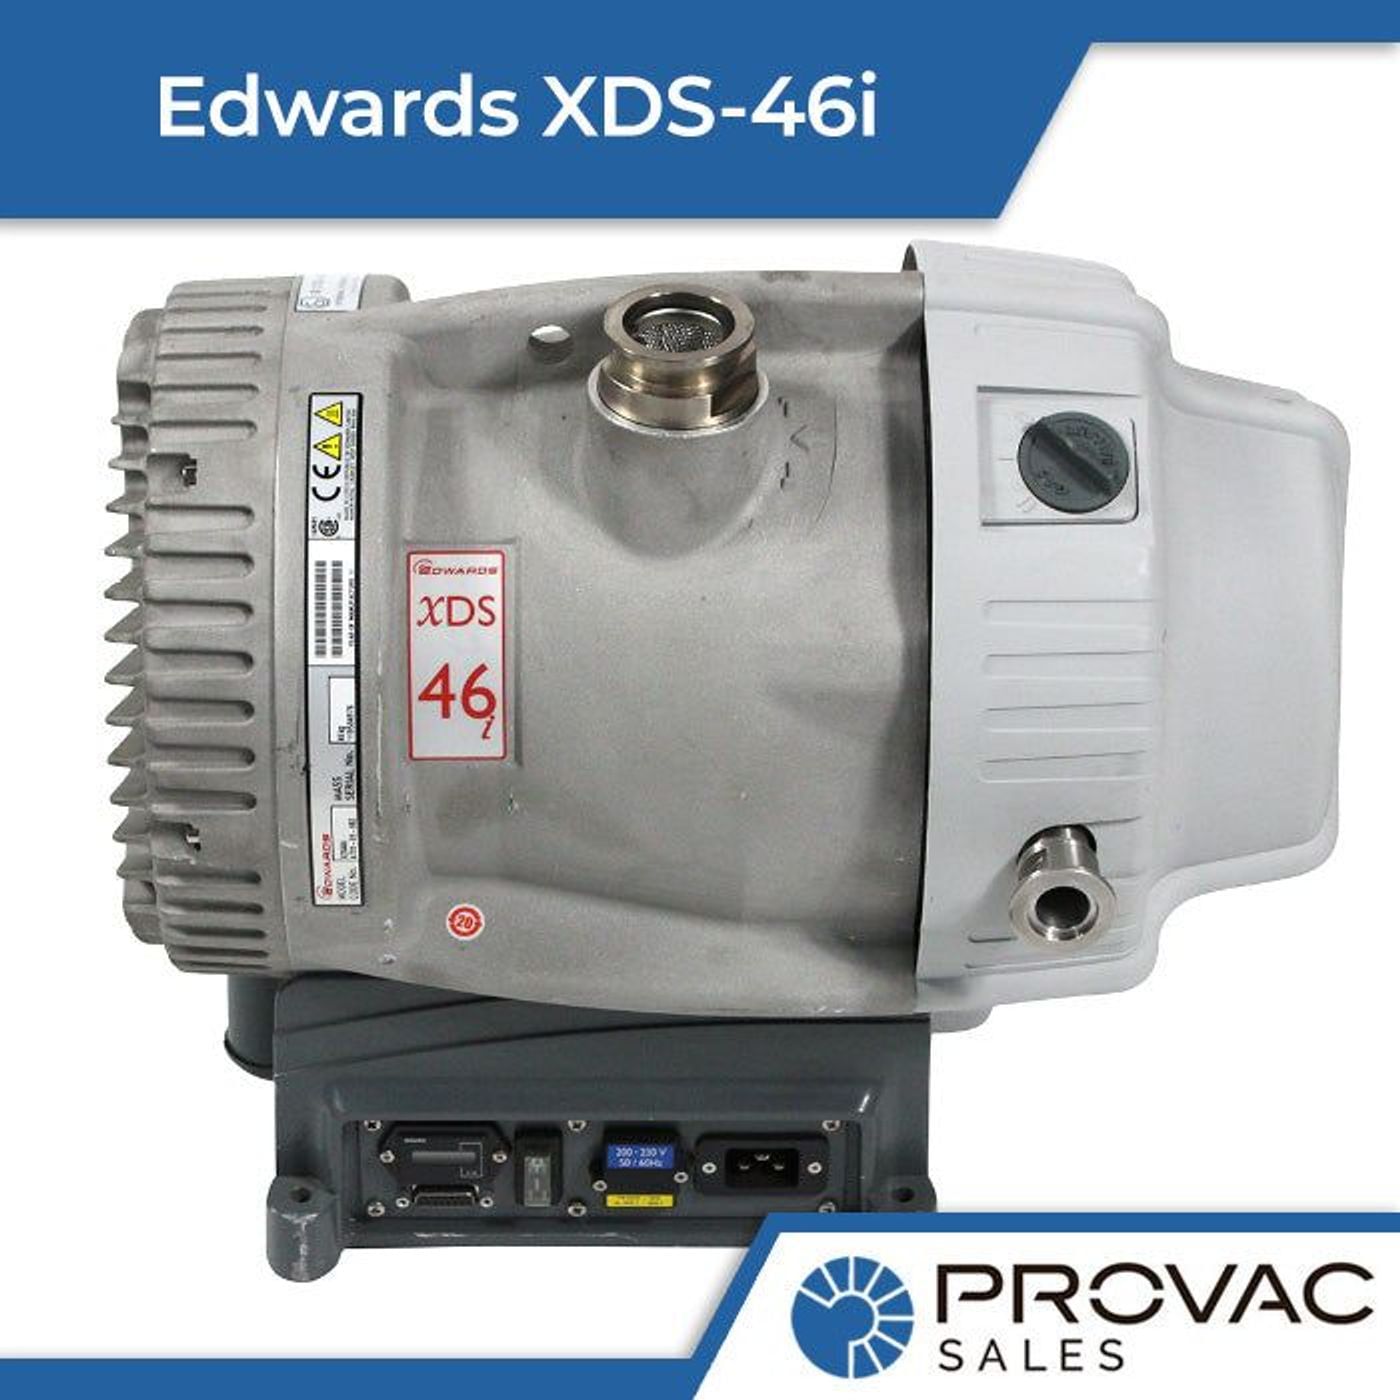 Edwards XDS-46i Scroll Pump: In Stock, Ready to Ship